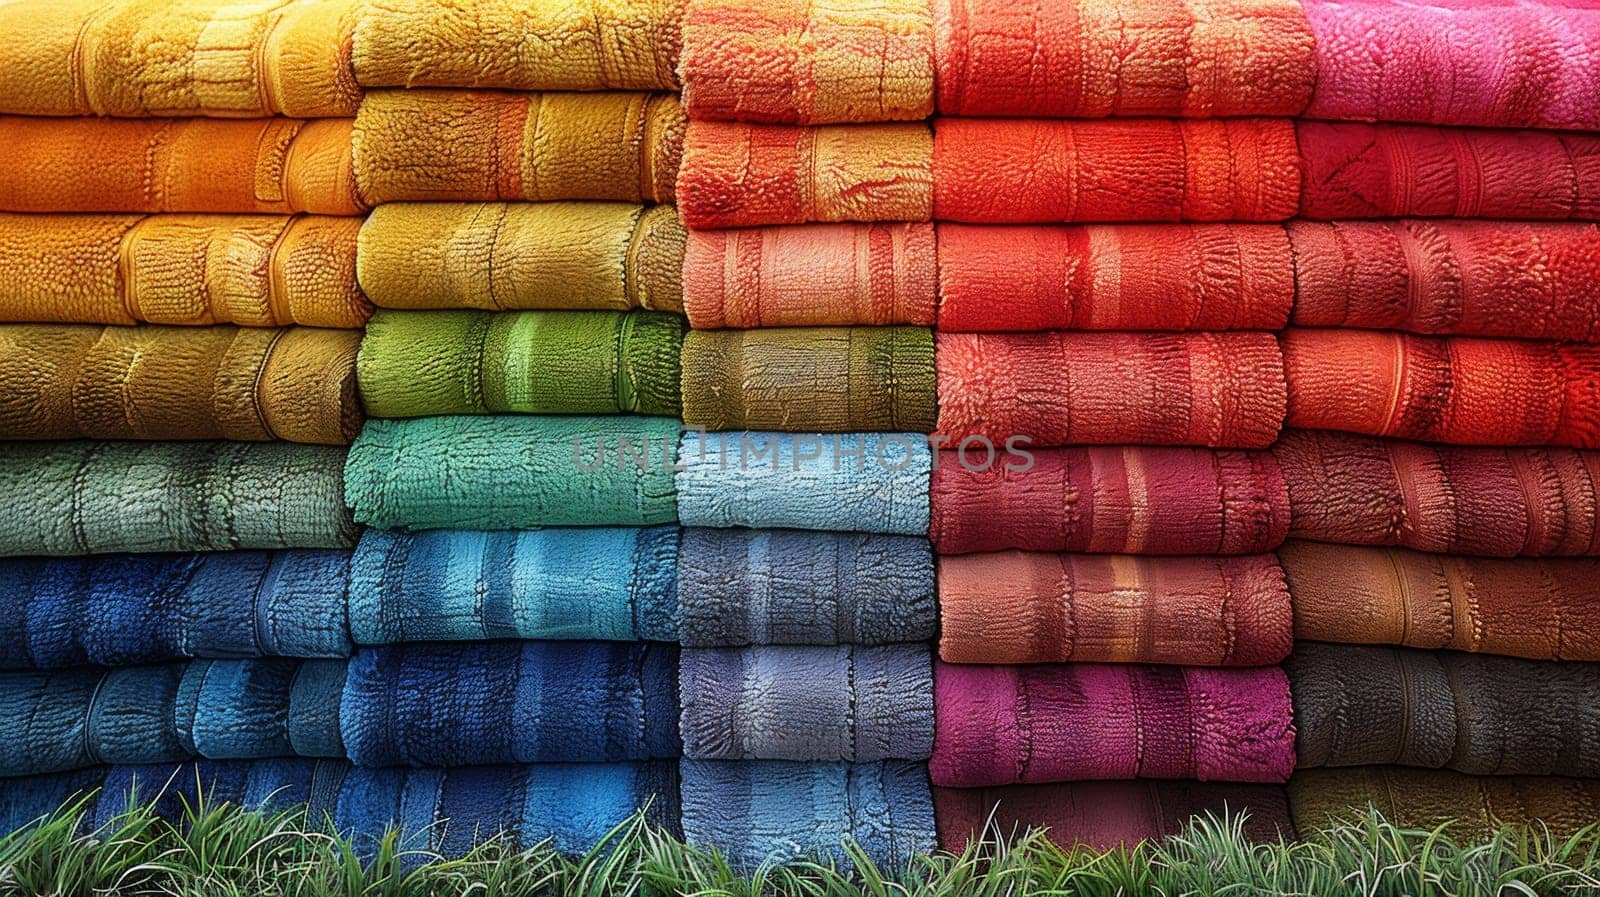 A stack of colorful towels stacked on top of each other, AI by starush